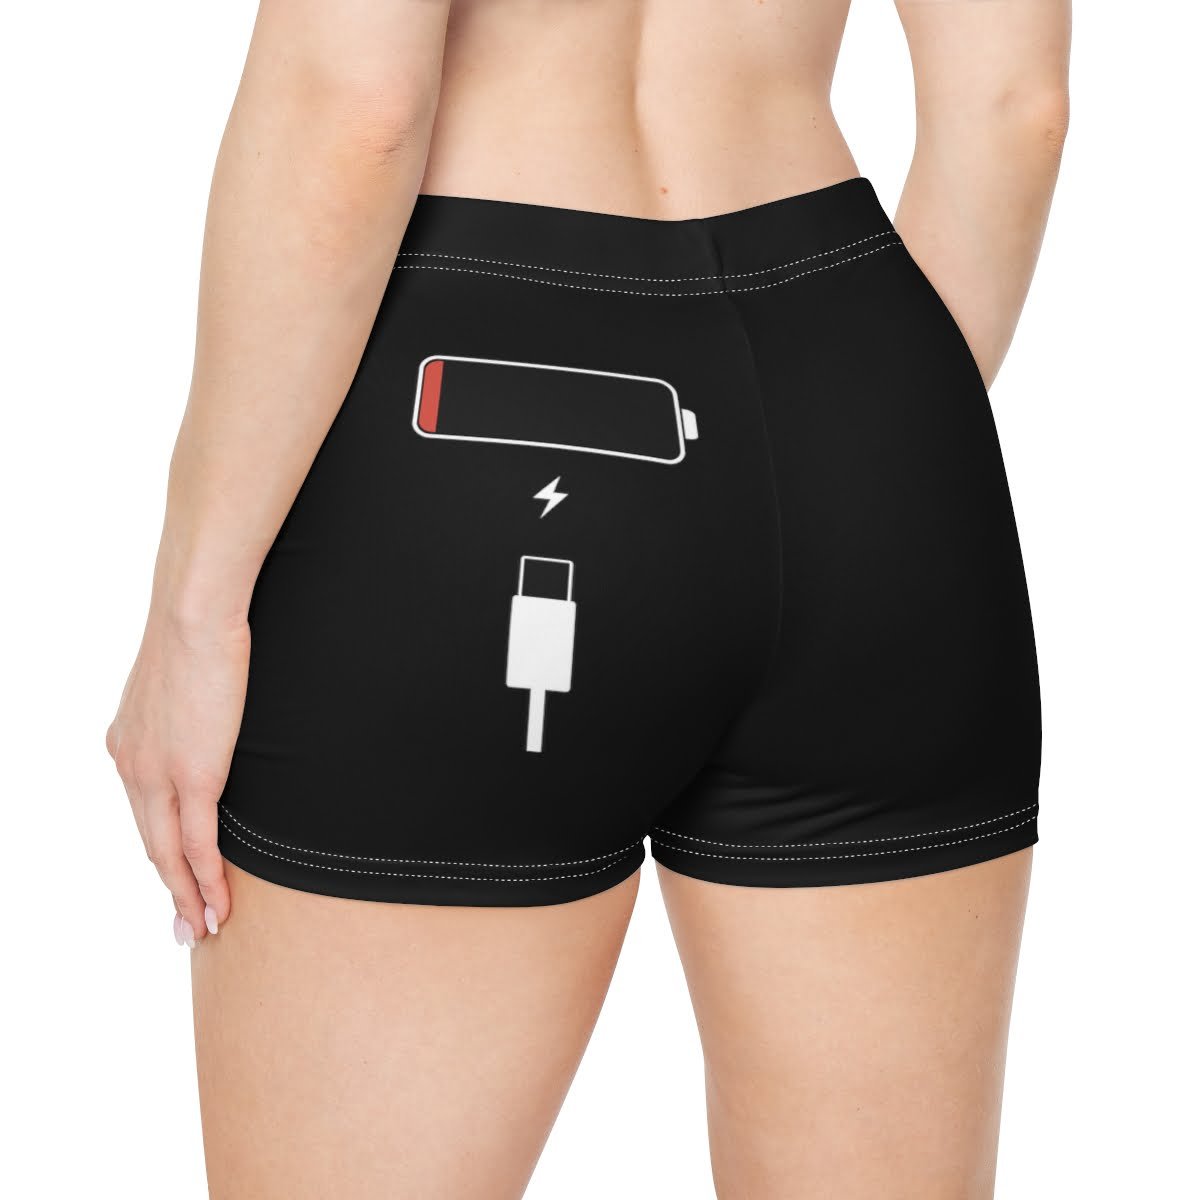 - Women's Shorts with Low Battery Need Charging Logo: Comfy, Stylish, and High-Tech - NoowAI Shop